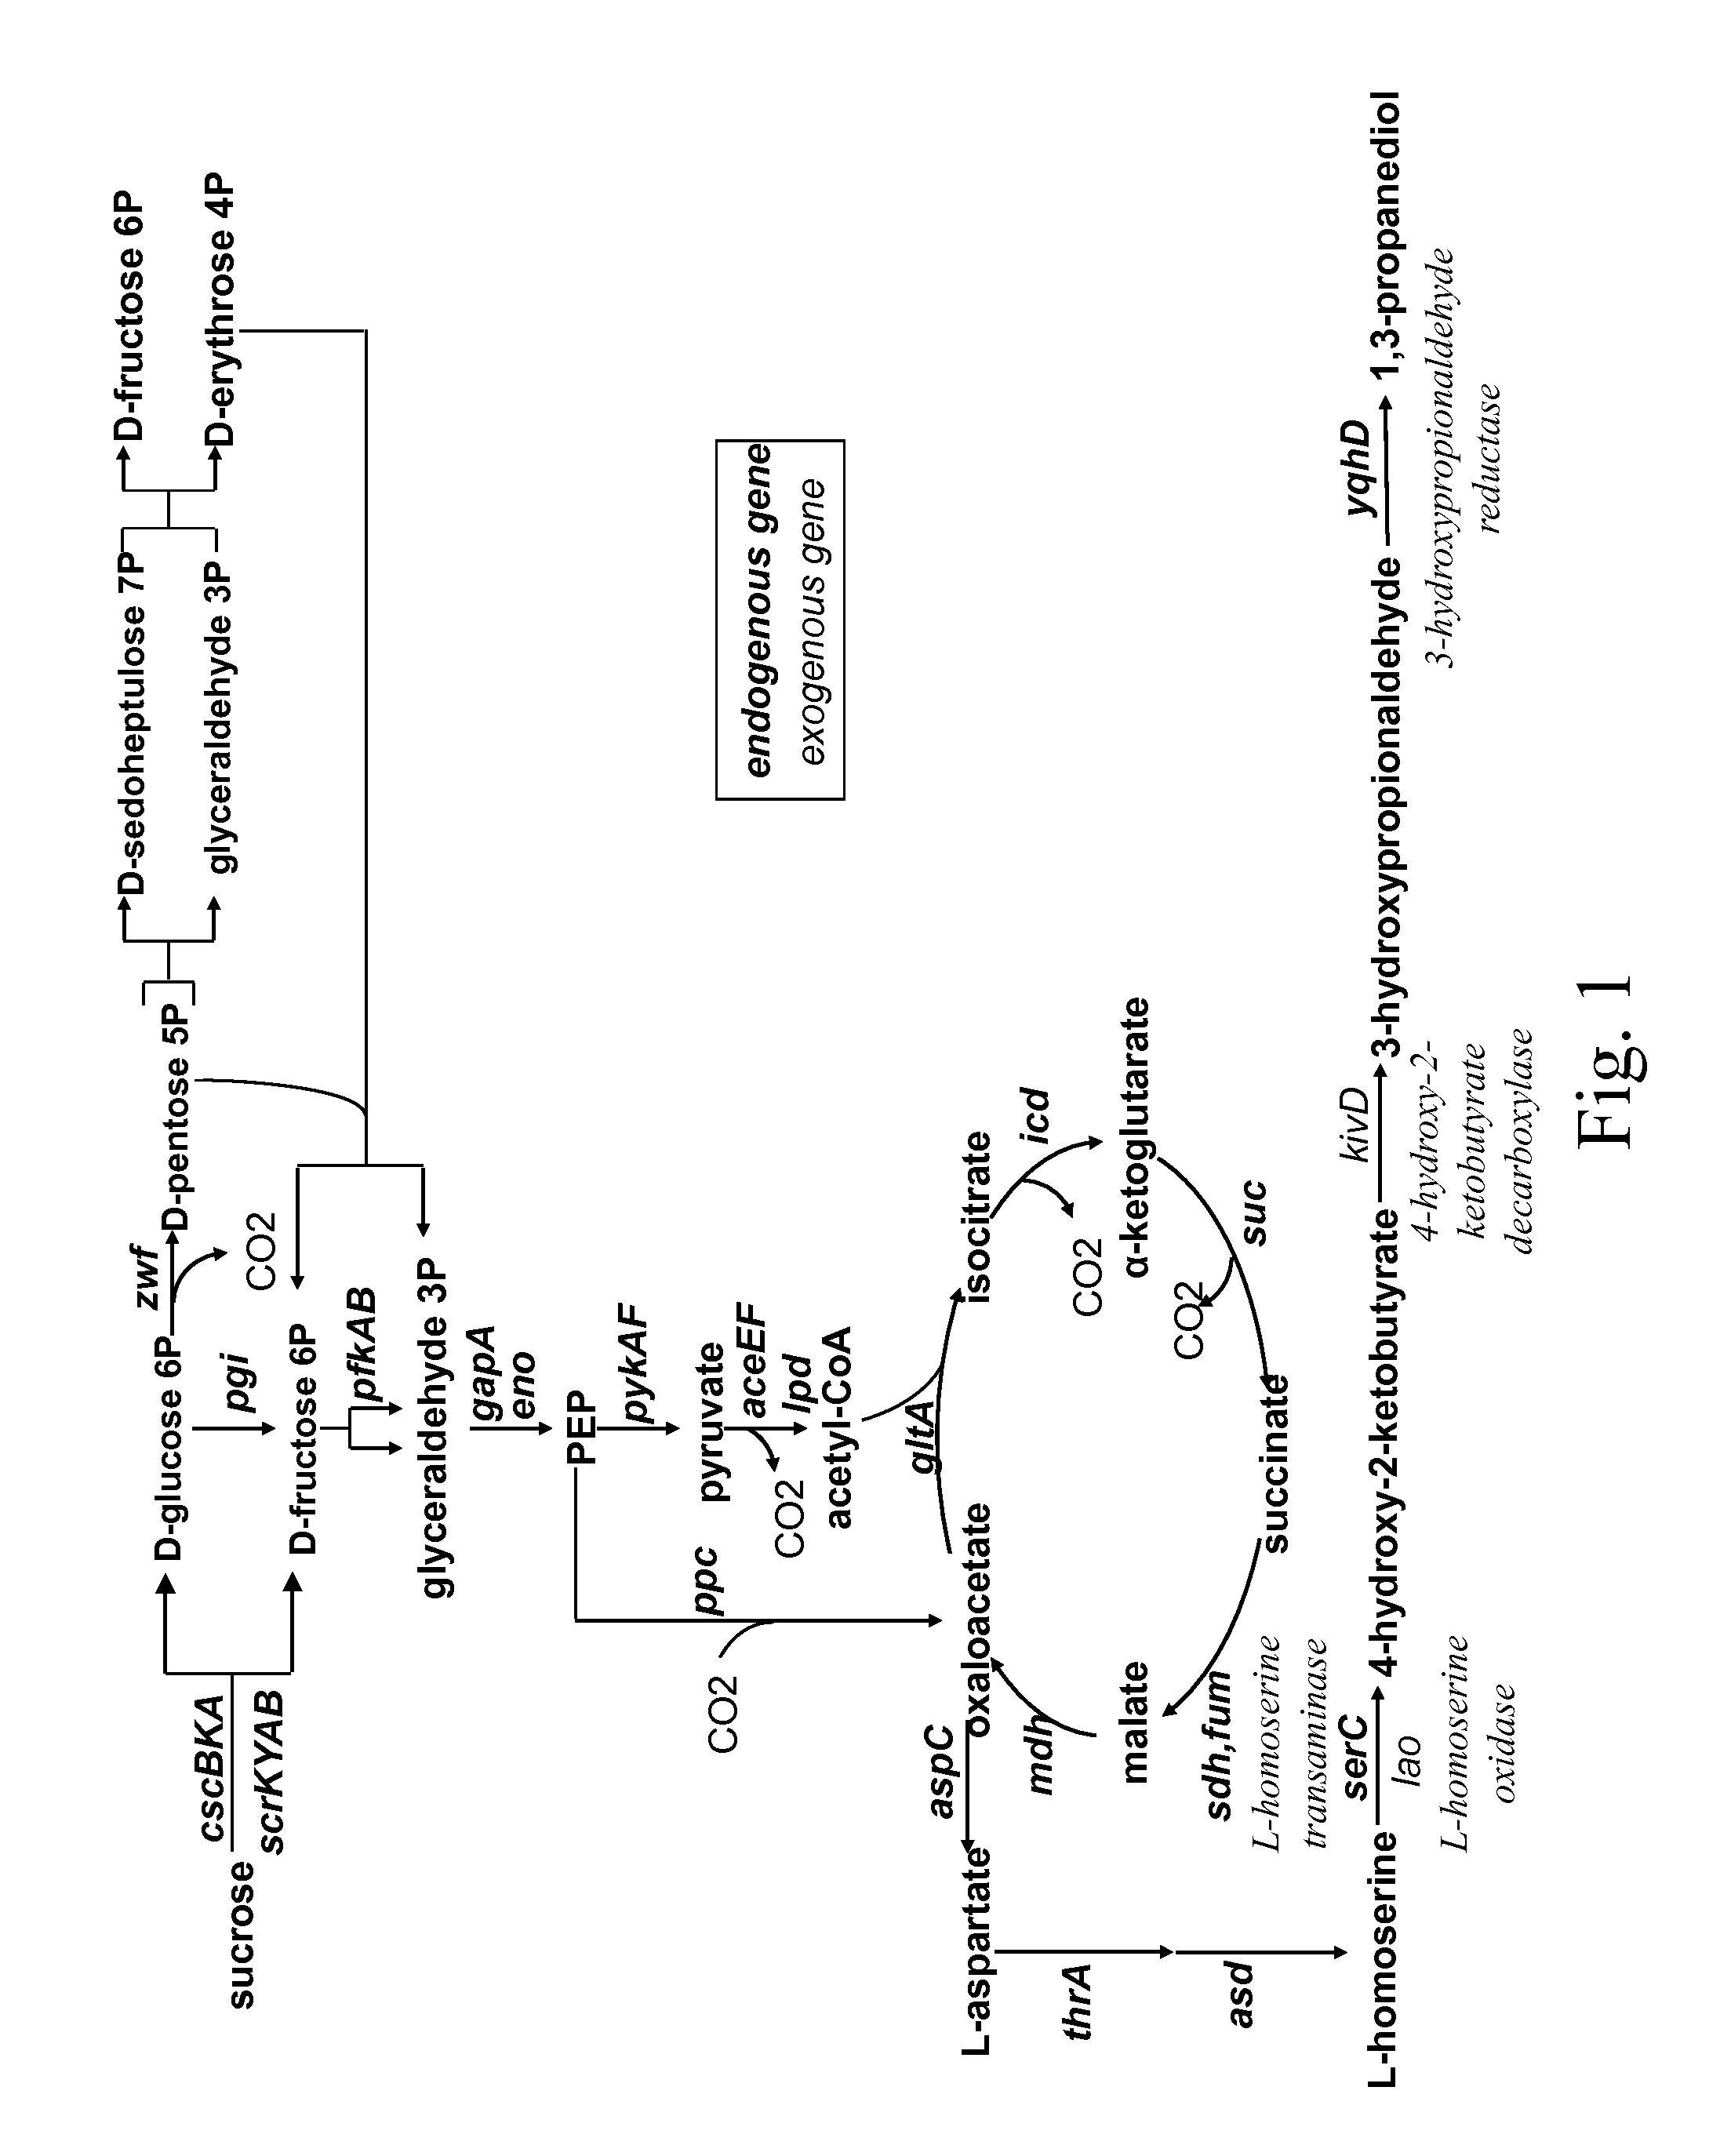 Method for the preparation of 1,3-propanediol from sucrose